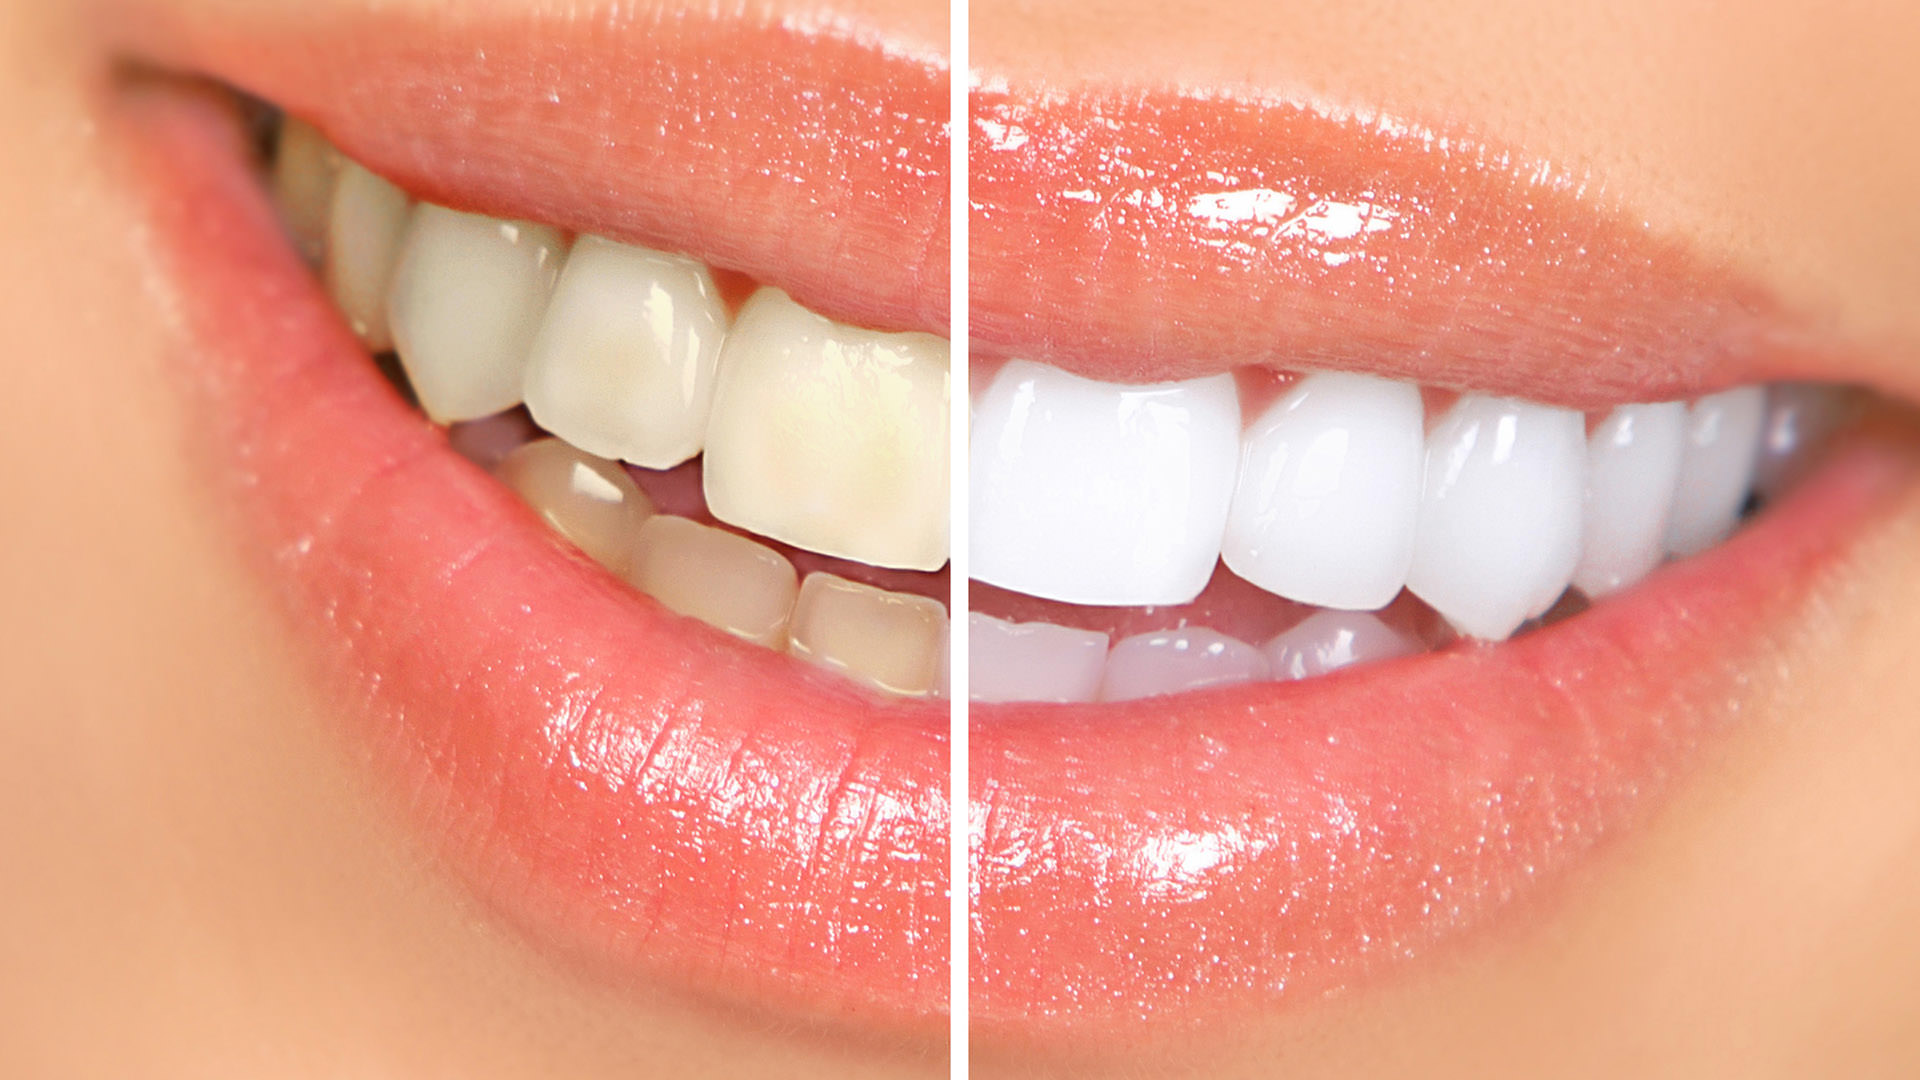 Smile confidently with a *free* teeth whitening makeover from Church Road Dental